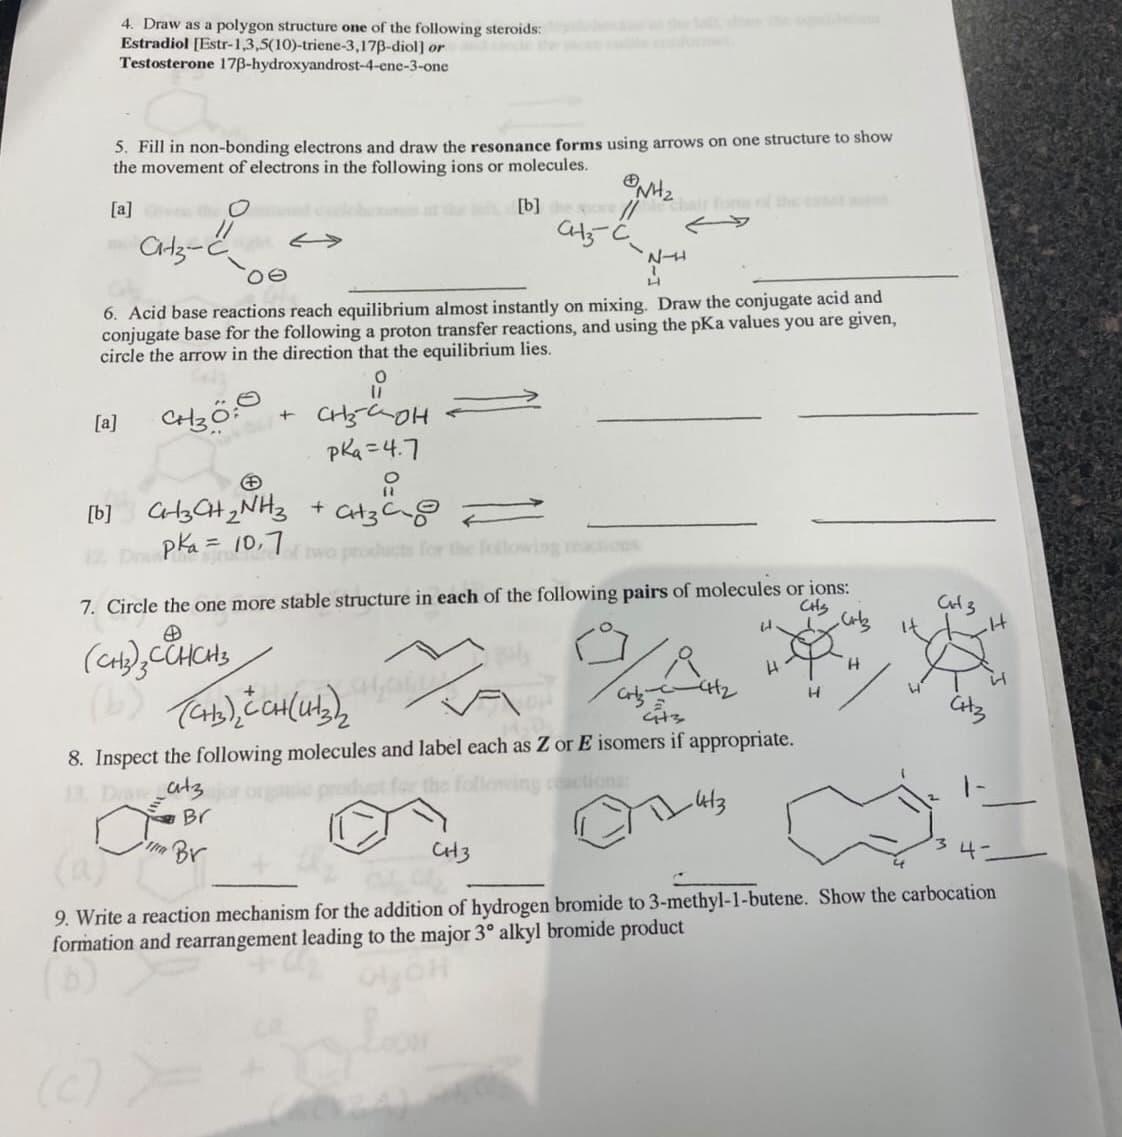 4. Draw as a polygon structure one of the following steroids:
Estradiol [Estr-1,3,5(10)-triene-3,17B-diol] or
Testosterone 17B-hydroxyandrost-4-ene-3-one
5. Fill in non-bonding electrons and draw the resonance forms using arrows on one structure to show
the movement of electrons in the following ions or molecules.
[a] th O
[b] o /
hair fom f the et
6. Acid base reactions reach equilibrium almost instantly on mixing. Draw the conjugate acid and
conjugate base for the following a proton transfer reactions, and using the pKa values you are given,
circle the arrow in the direction that the equilibrium lies.
[a]
pka =4.7
[b] C3G+2NH3 + at3
pka= 10,7
Tiwo products for the
7. Circle the one more stable structure in each of the following pairs of molecules or ions:
CHS
8. Inspect the following molecules and label each as Z or E isomers if appropriate.
atz
actions
Br
Br
CH3
9. Write a reaction mechanism for the addition of hydrogen bromide to 3-methyl-1-butene. Show the carbocation
formation and rearrangement leading to the major 3° alkyl bromide product
